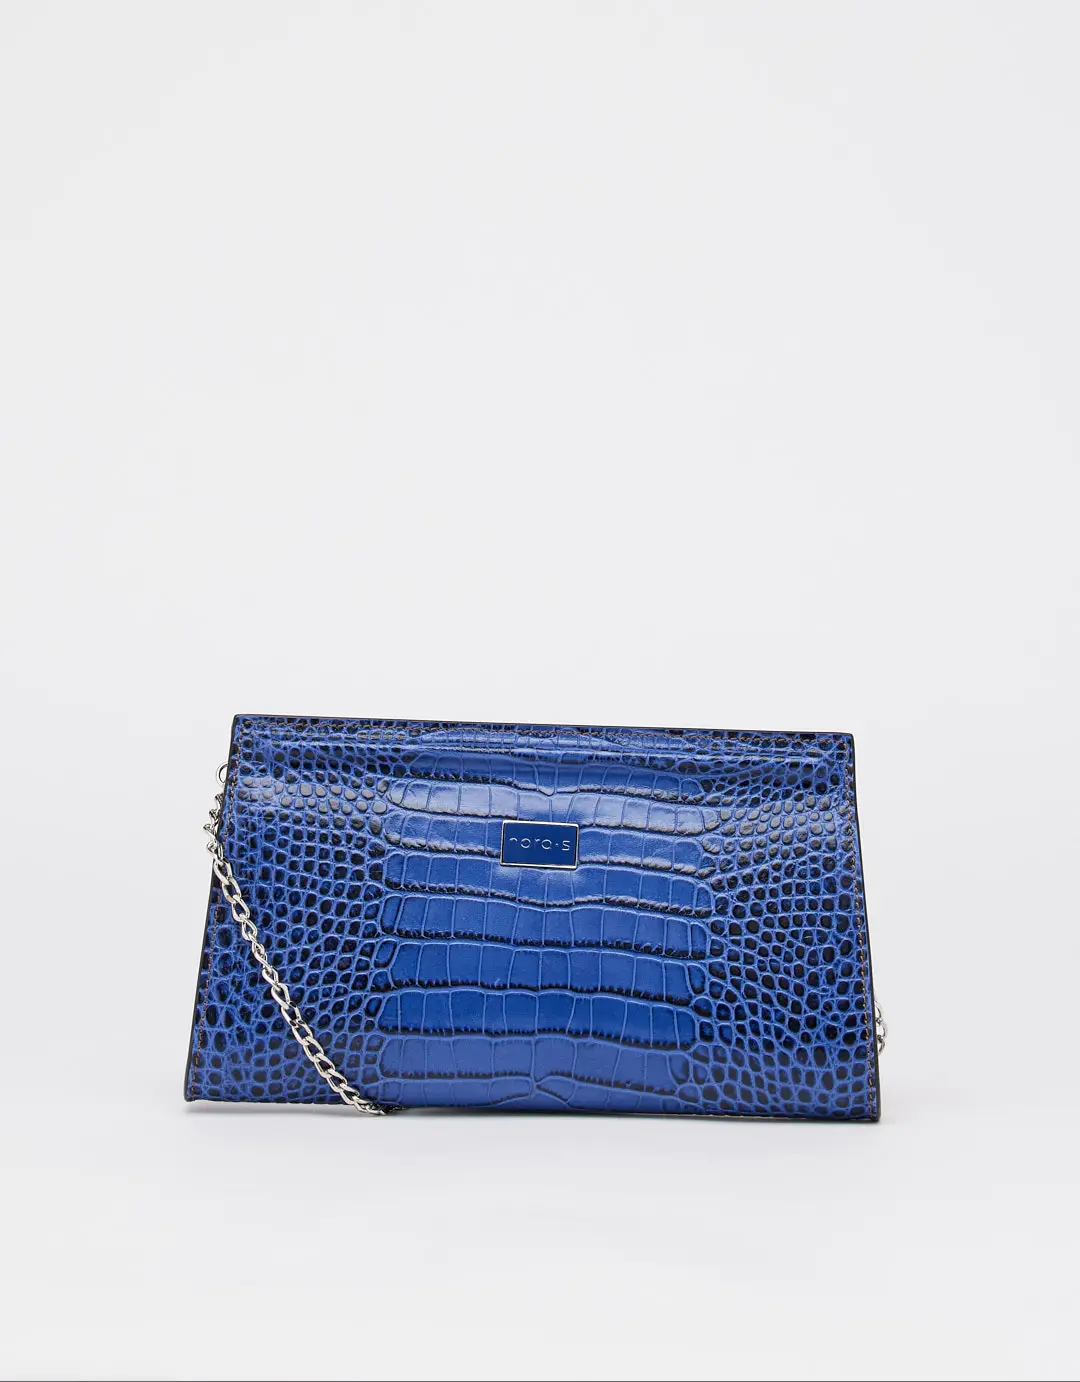 Looking for a small clutch for a date night? Want to downsize your large, bulky purse yet, still leave enough room for the essentials? This leather clutch bag is the ideal companion for a night out of town. The mosaic on the sides adds a touch of both luxury and elegance, and the Croco always gives the impression that you are wearing something valuable, while the leather construction ensures durability. The clutch is large enough to fit your essentials yet, small enough to be easily carried.